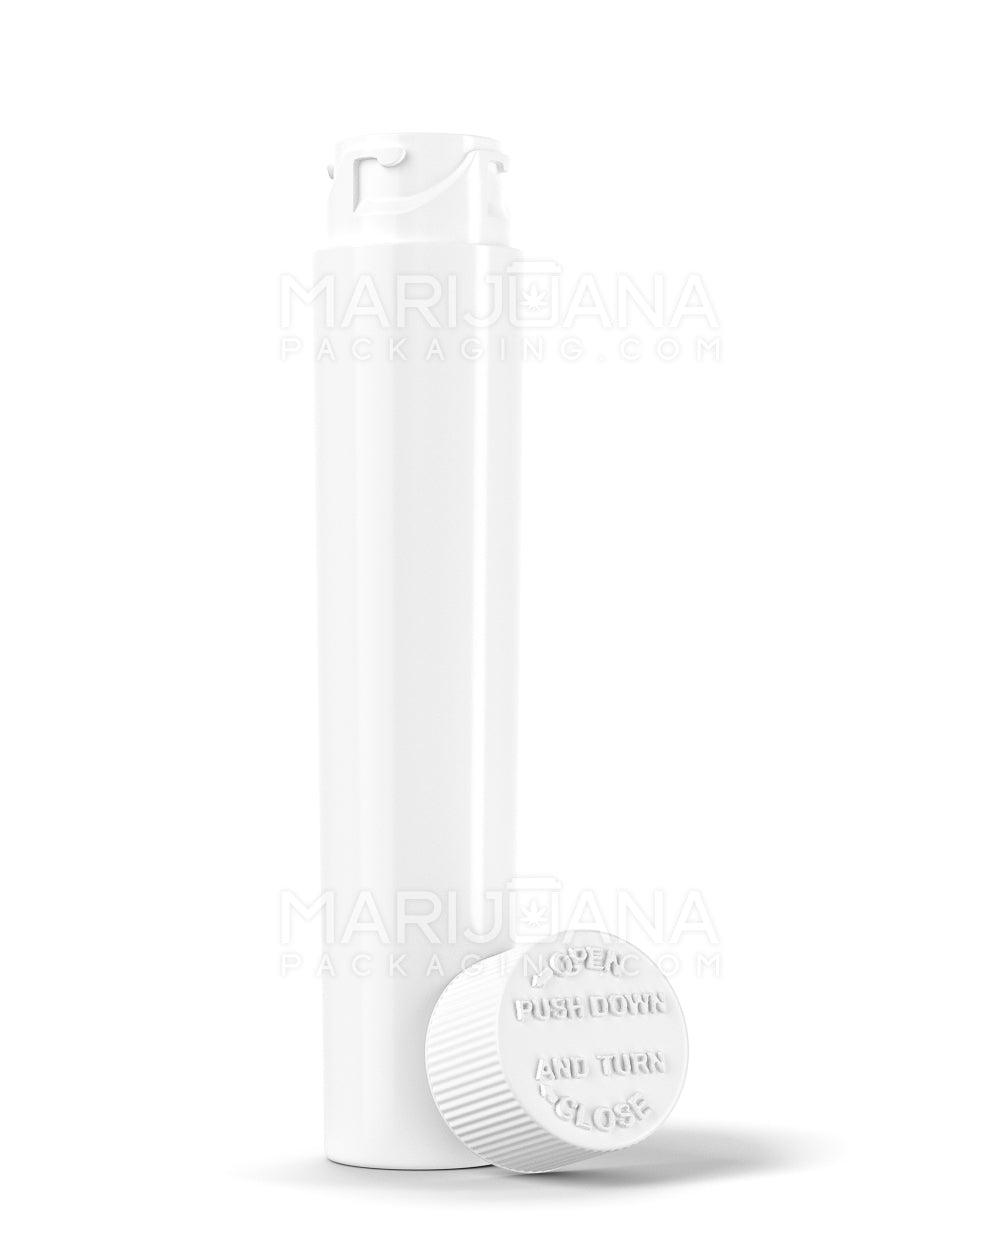 Child Resistant | Push Down & Turn Vape Cartridge Container | 72mm - White Plastic - 1650 Count - 3